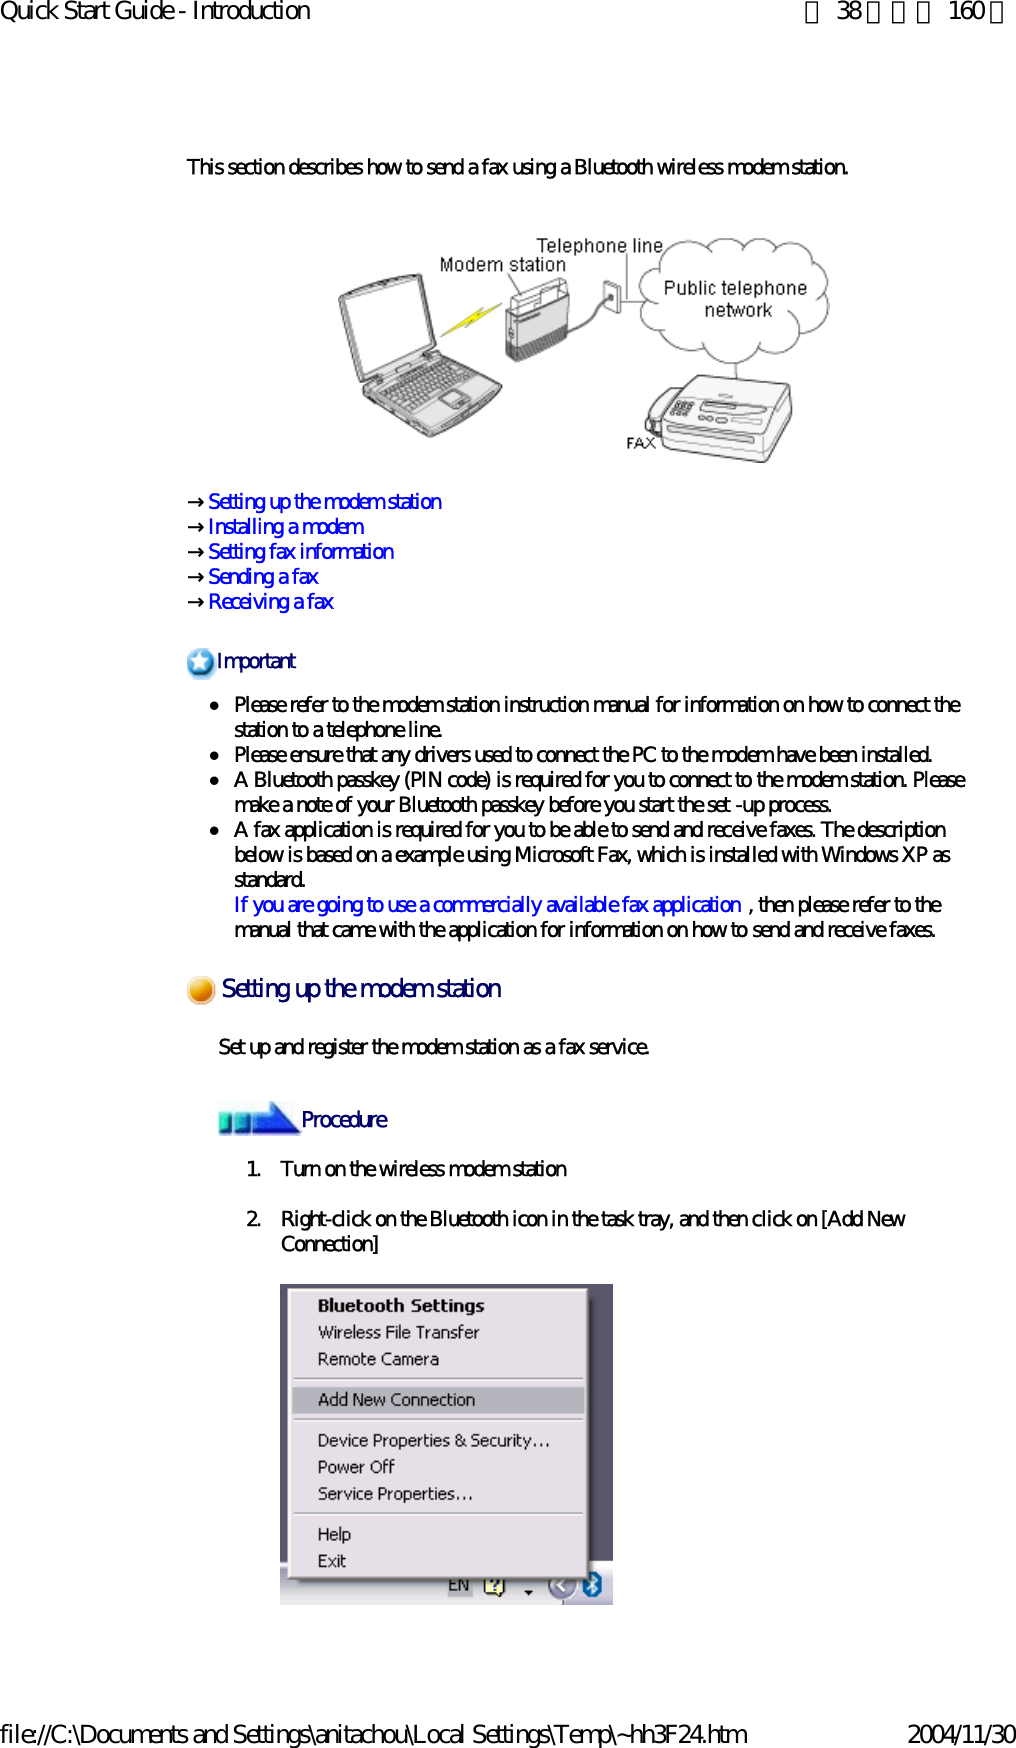 Quick Start Guide - Introduction 第 38 頁，共 160 頁file://C:\Documents and Settings\anitachou\Local Settings\Temp\~hh3F24.htm 2004/11/30This section describes how to send a fax using a Bluetooth wireless modem station.→Setting up the modem station→Installing a modem →Setting fax information→Sending a fax→Receiving a faxzPlease refer to the modem station instruction manual for information on how to connect the station to a telephone line. zPlease ensure that any drivers used to connect the PC to the modem have been installed.zA Bluetooth passkey (PIN code) is required for you to connect to the modem station. Please make a note of your Bluetooth passkey before you start the set -up process.zA fax application is required for you to be able to send and receive faxes. The description below is based on a example using Microsoft Fax, which is installed with Windows XP as standard. If you are going to use a commercially available fax application , then please refer to the manual that came with the application for information on how to send and receive faxes. Set up and register the modem station as a fax service.1. Turn on the wireless modem station2. Right-click on the Bluetooth icon in the task tray, and then click on [Add New Connection] ImportantSetting up the modem stationProcedure